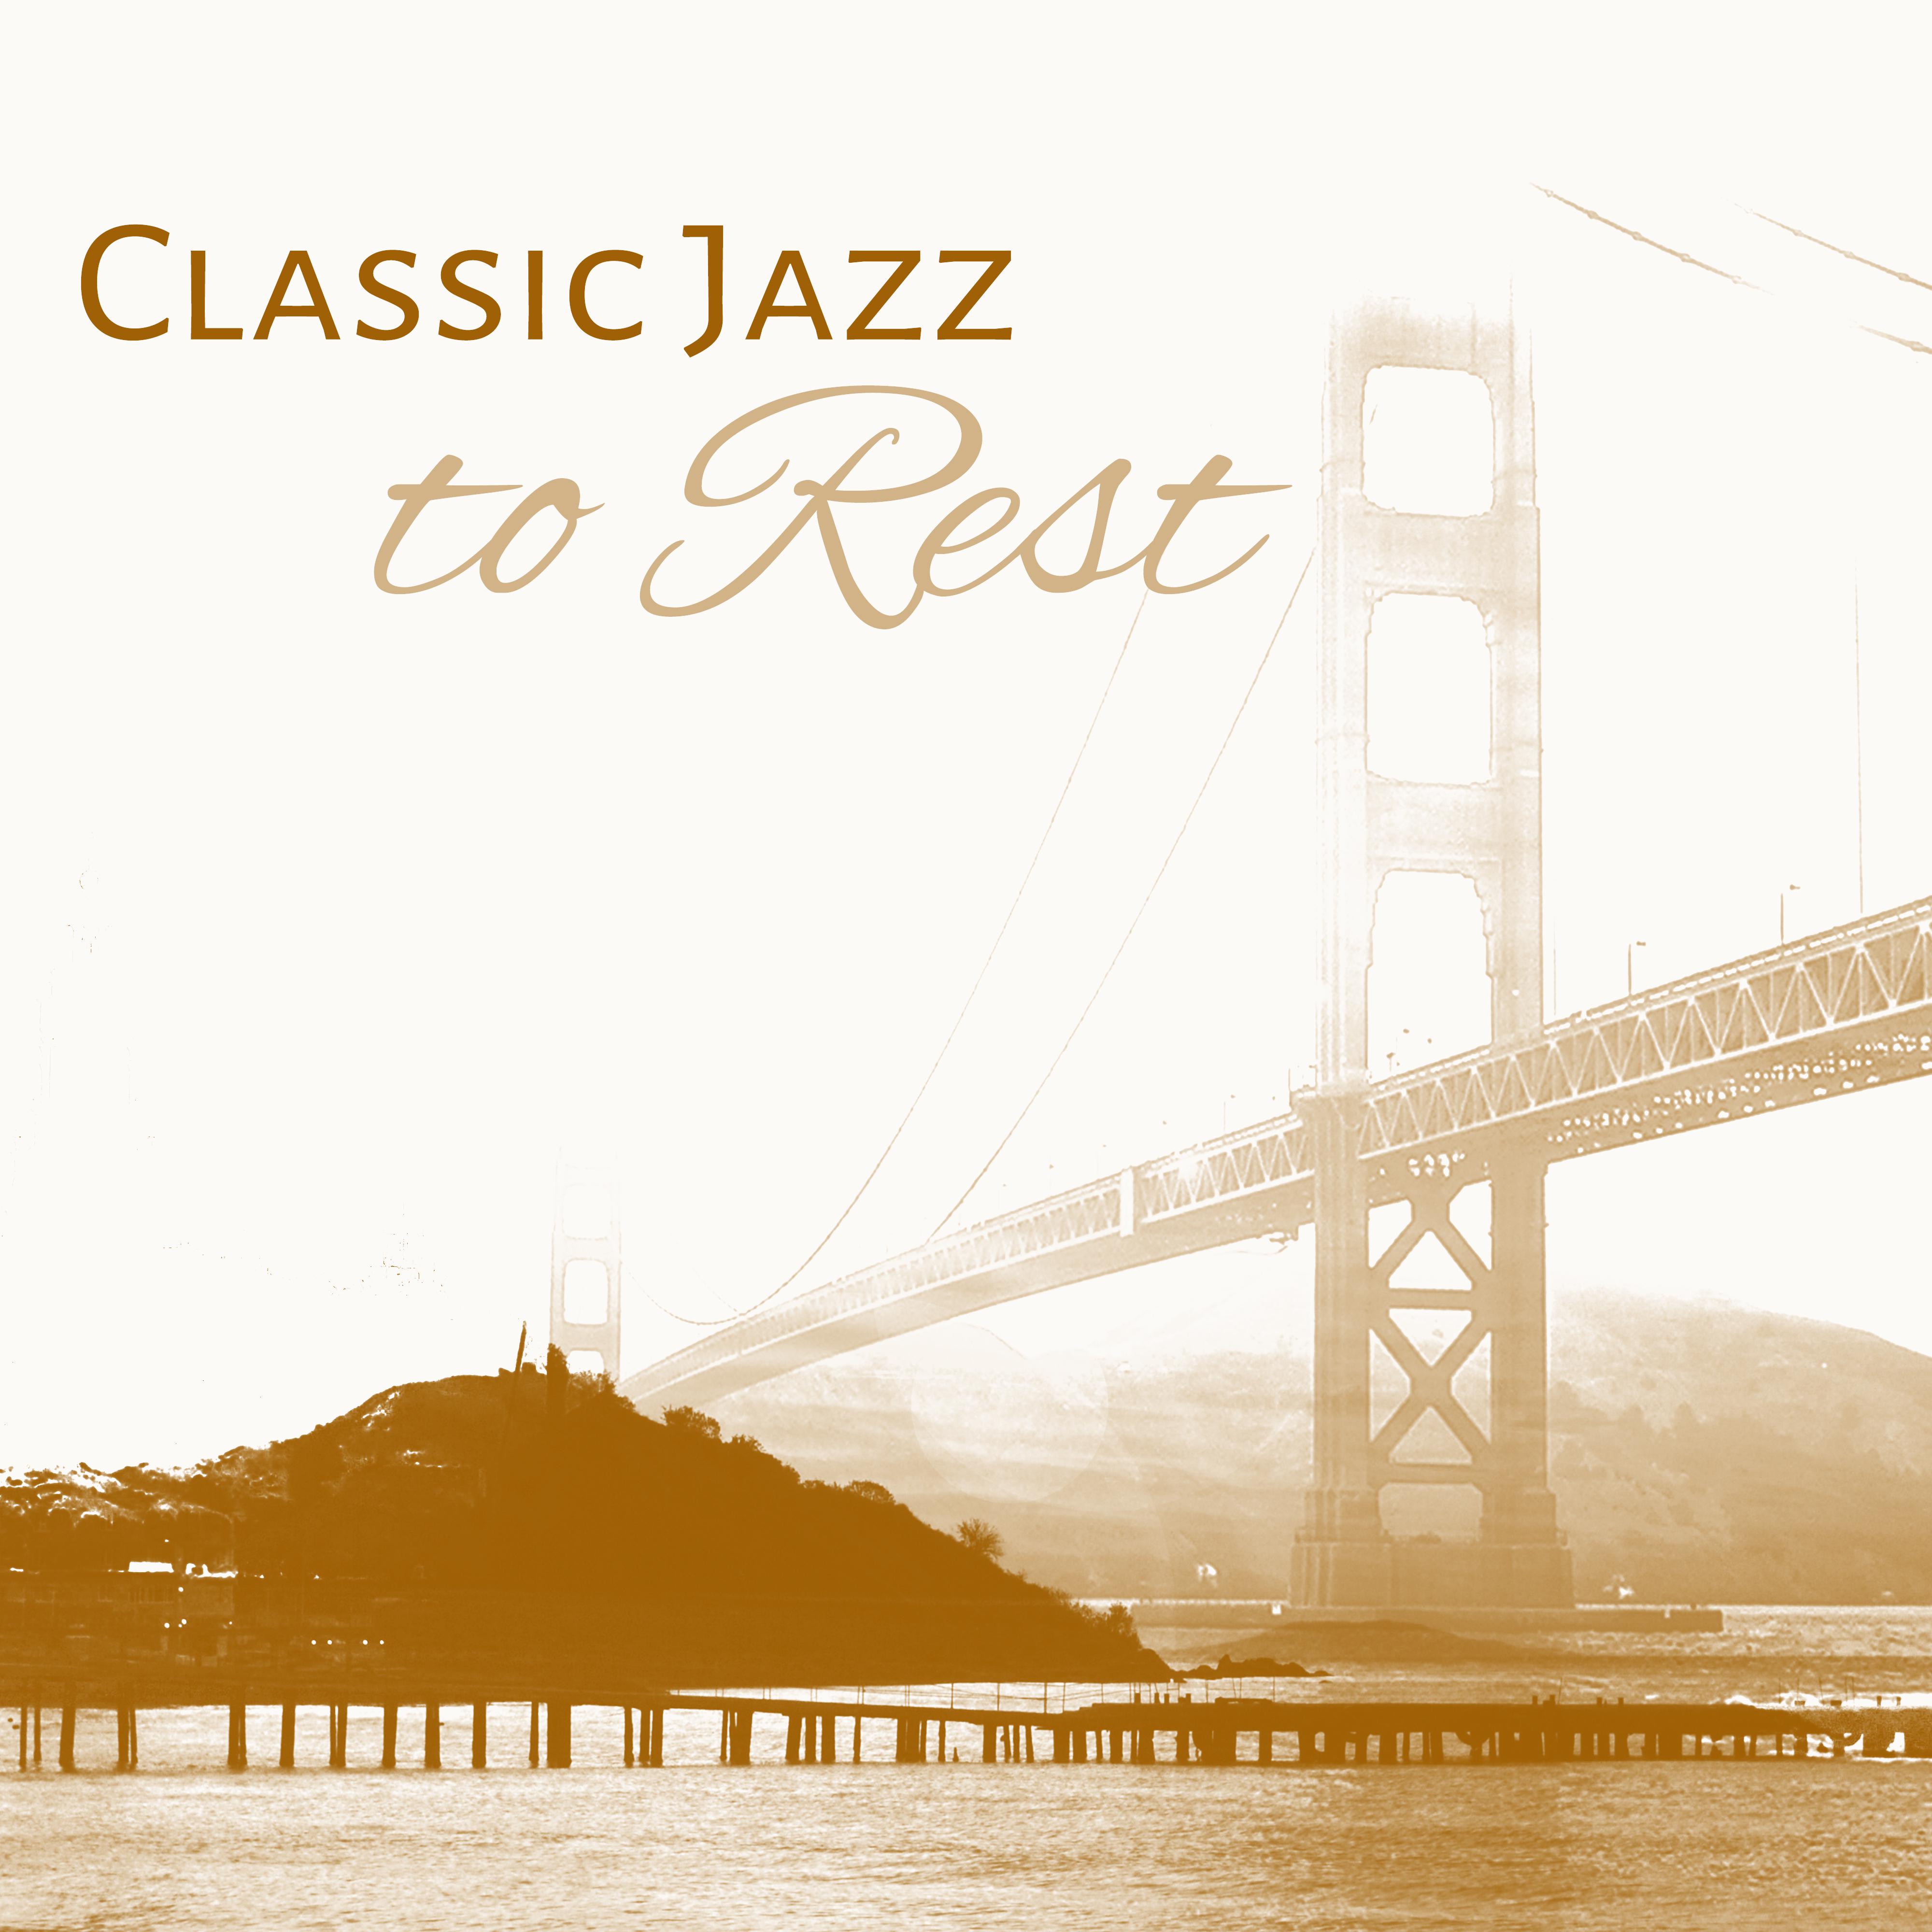 Classic Jazz to Rest – Instrumental Sounds for Relaxation, Morning Jazz, Coffee Talk, Piano Jazz, Peaceful Mind